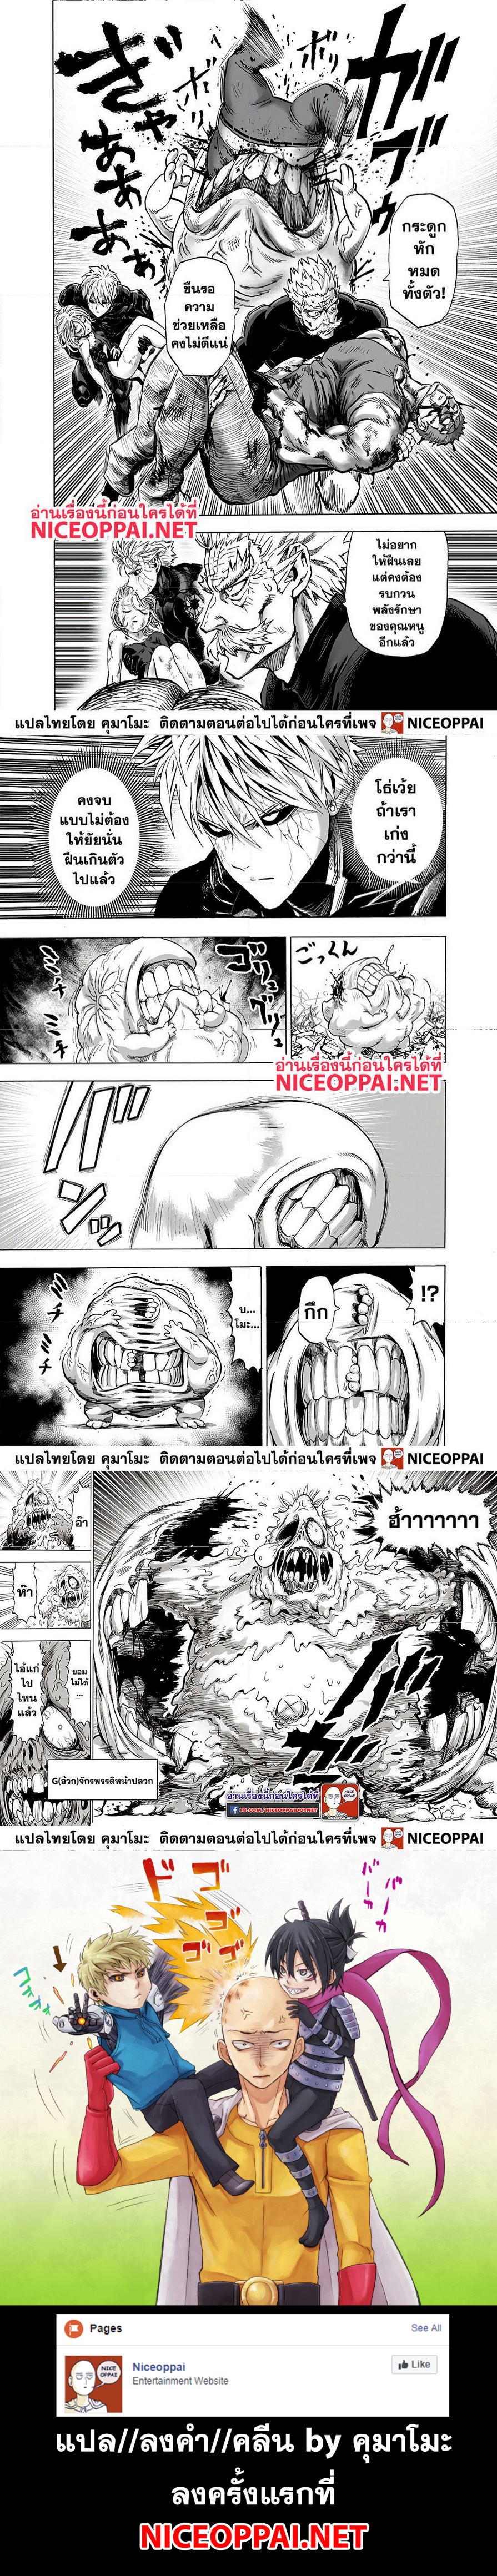 One Punch Man144.2 (6)